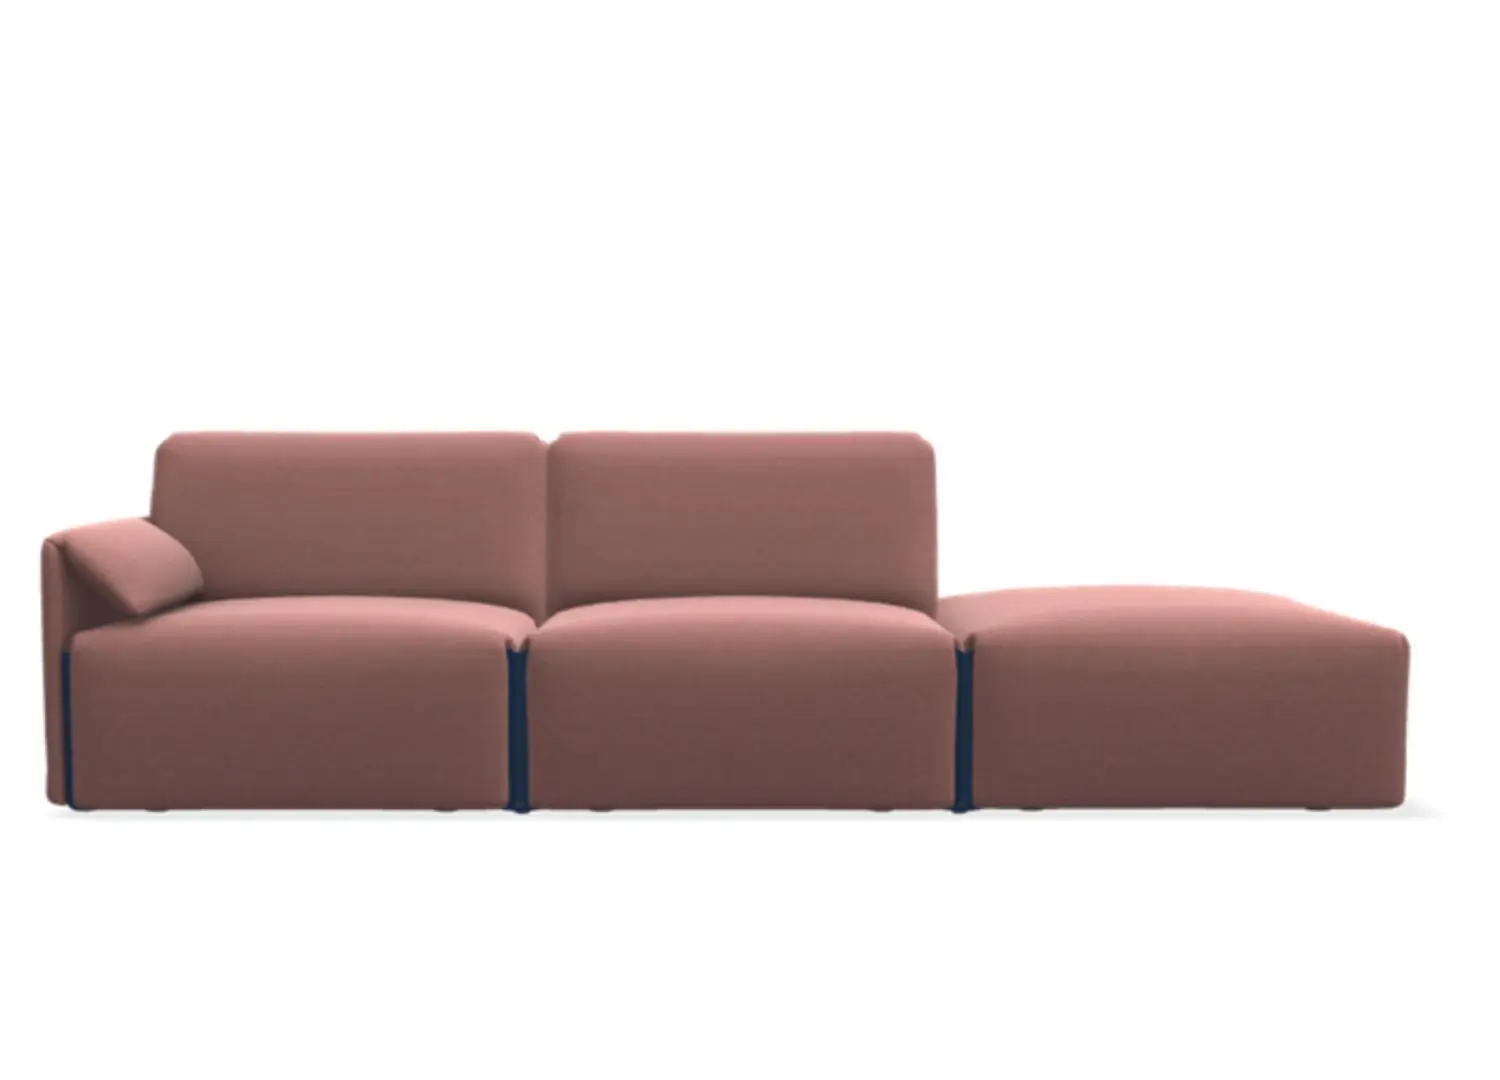 Costume _ 10 best-designed modular sofas that look and feel good